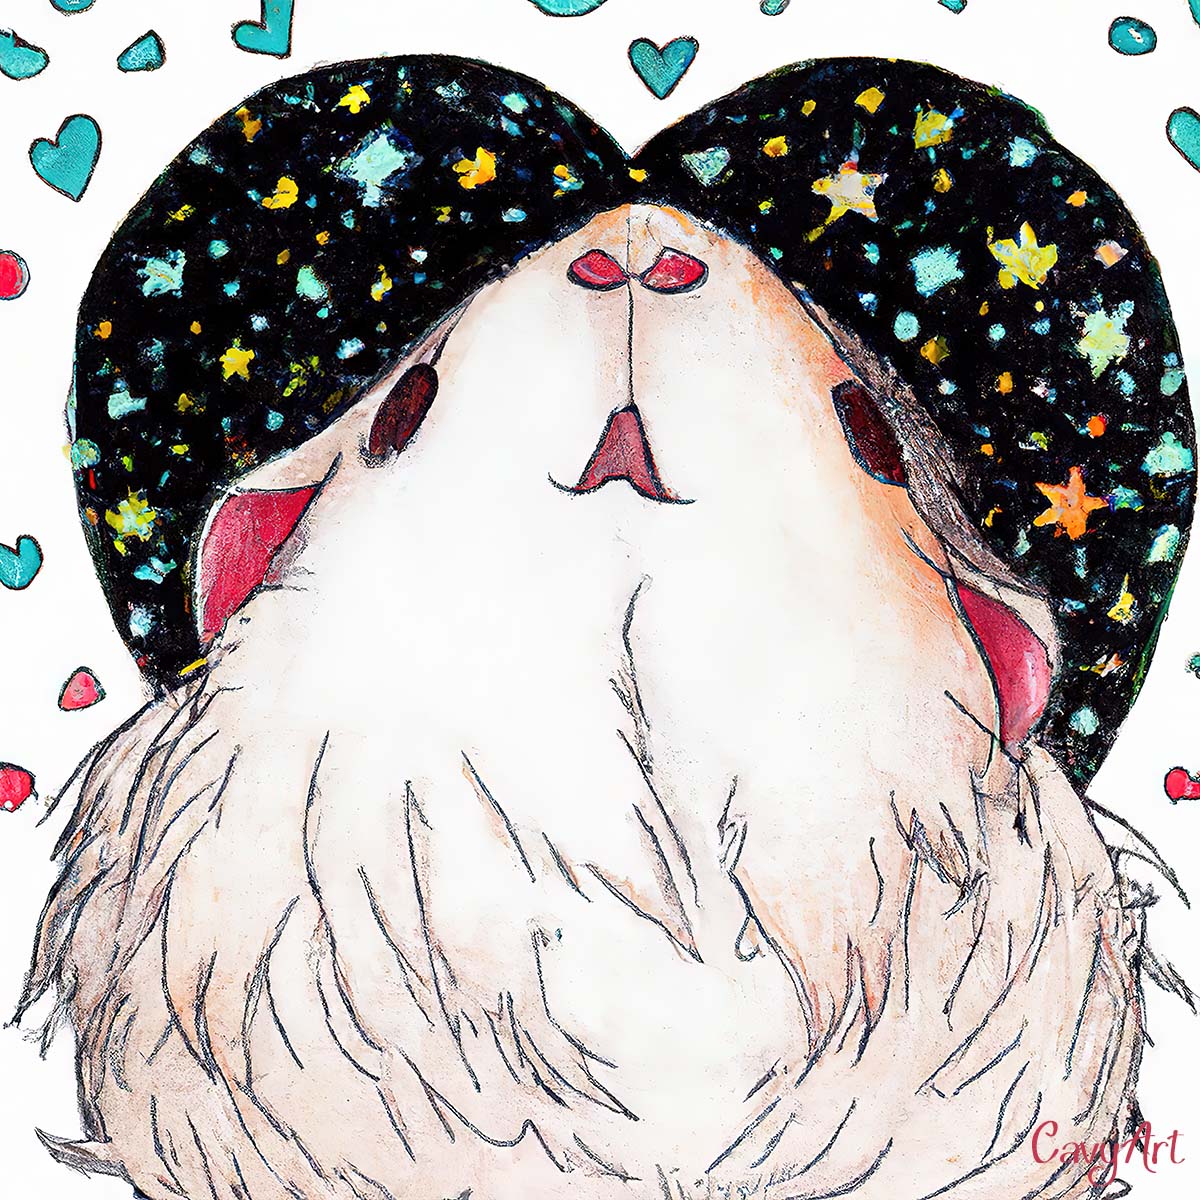 guinea pig in front of a heart with stars illustration by CavyArt